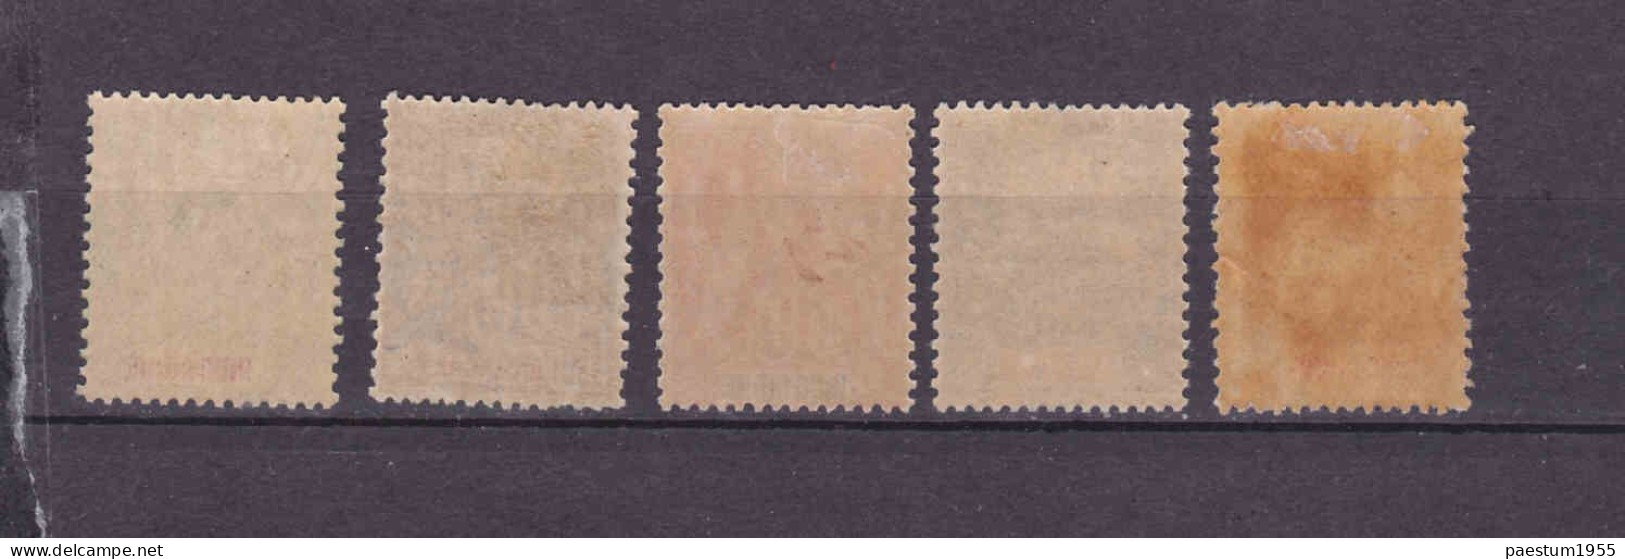 INDOCHINE - Lot Complet 5 Timbres Neuf* 1901 Type Groupe FR-IC 17 FR-IC 18 FR-IC 19 FR-IC 20 FR-IC 21 - Ongebruikt